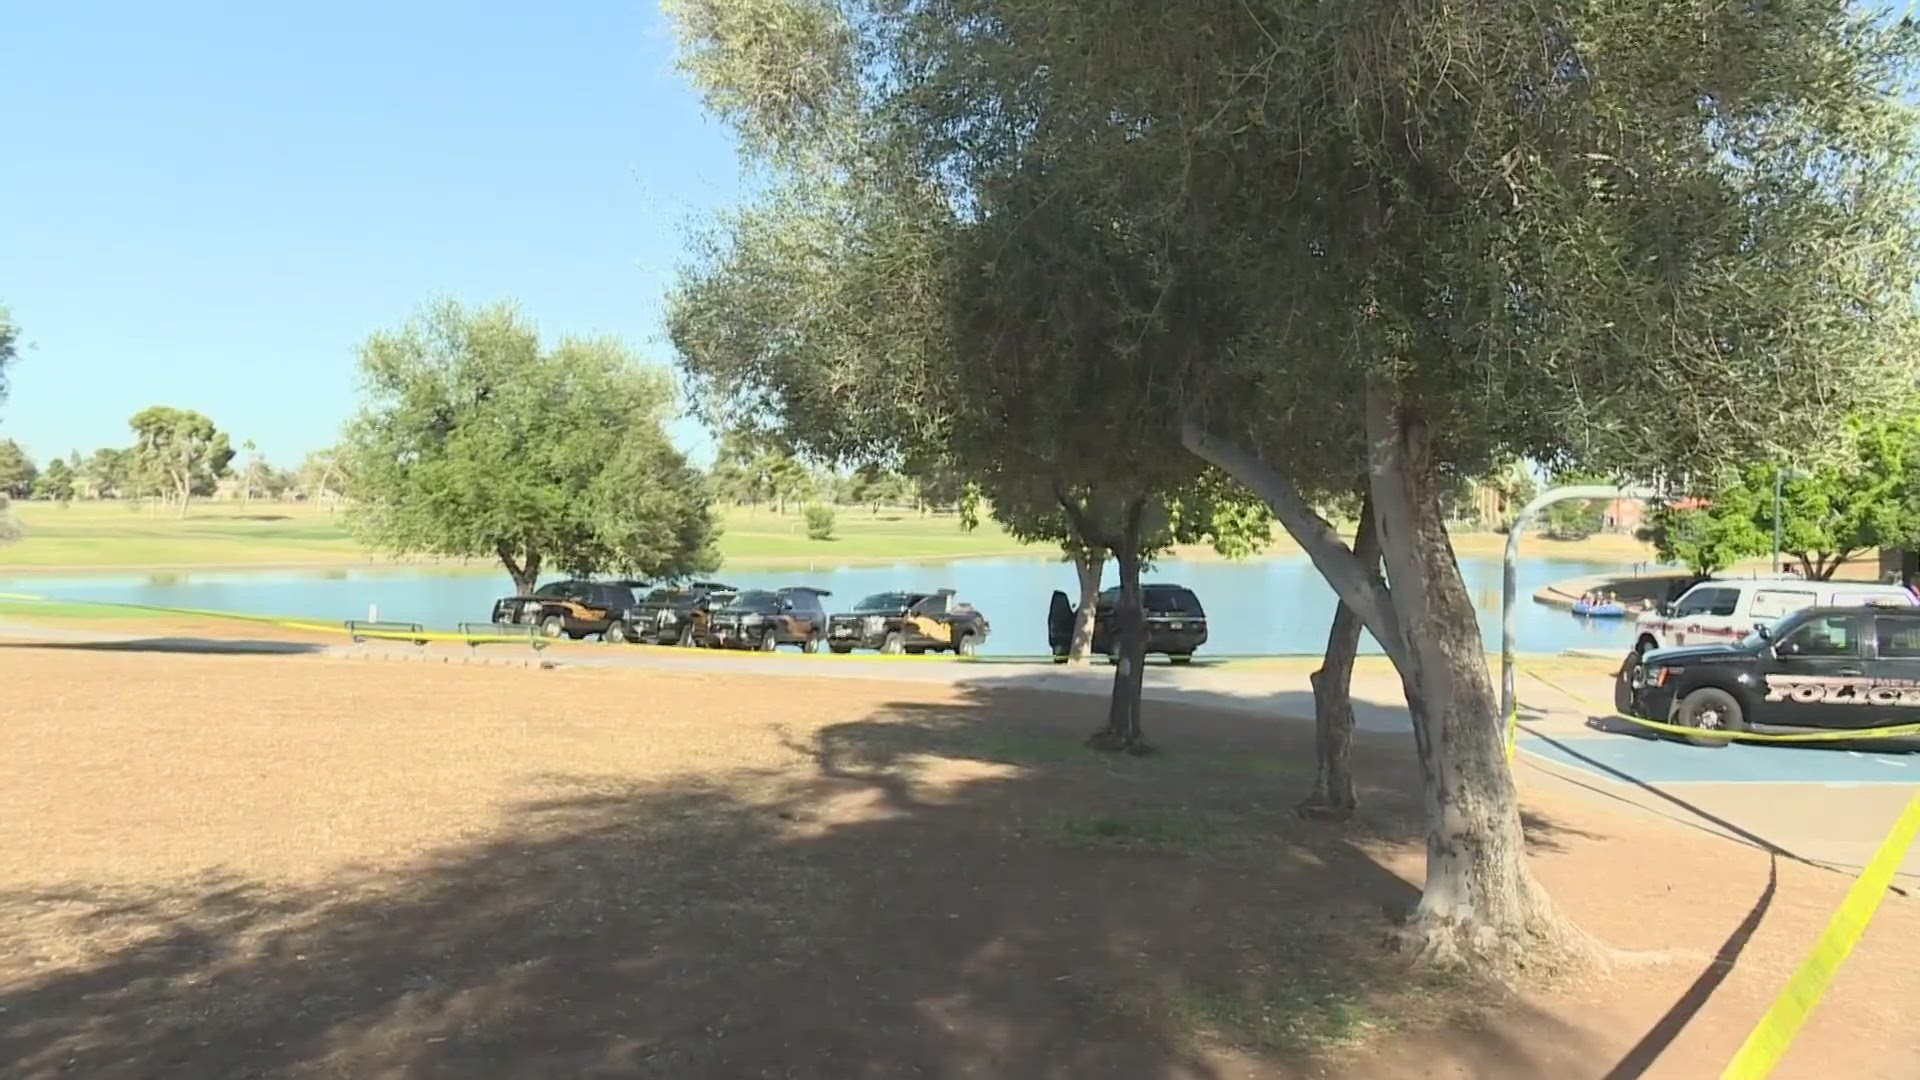 Crews are searching for a man after he reportedly went underwater near Dobson and Baseline roads, authorities said.